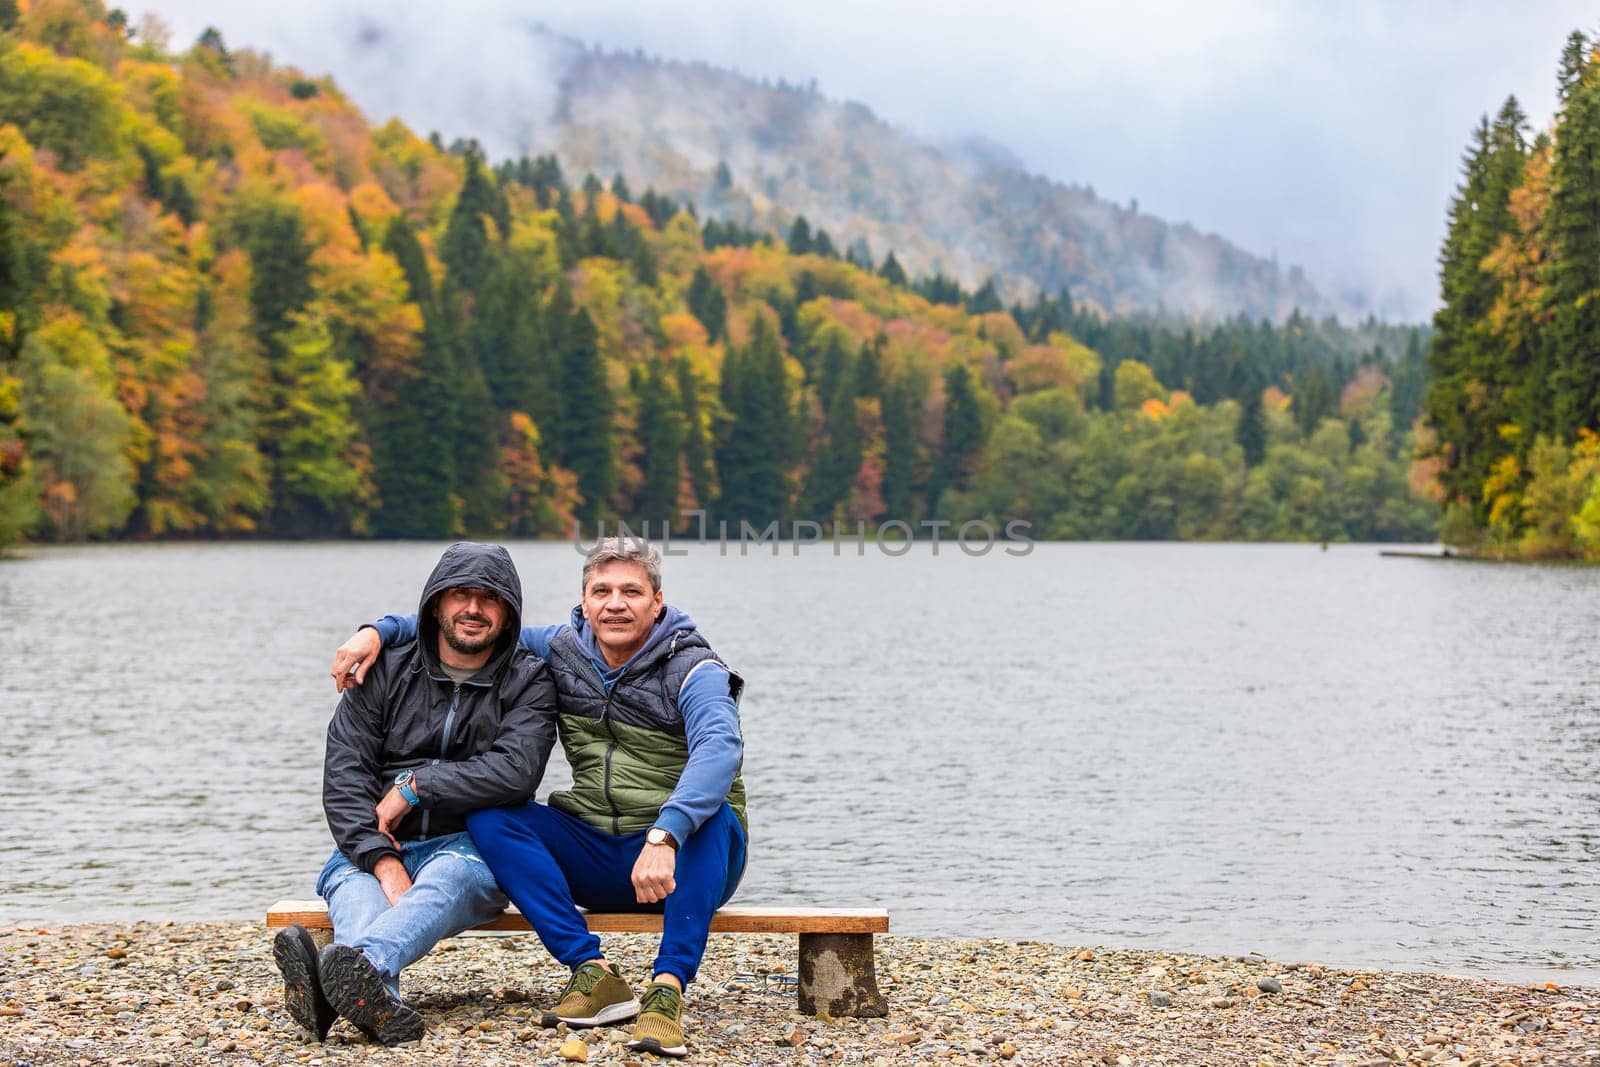 Two friends enjoy the view of a mountain lake surrounded by brightly colored trees